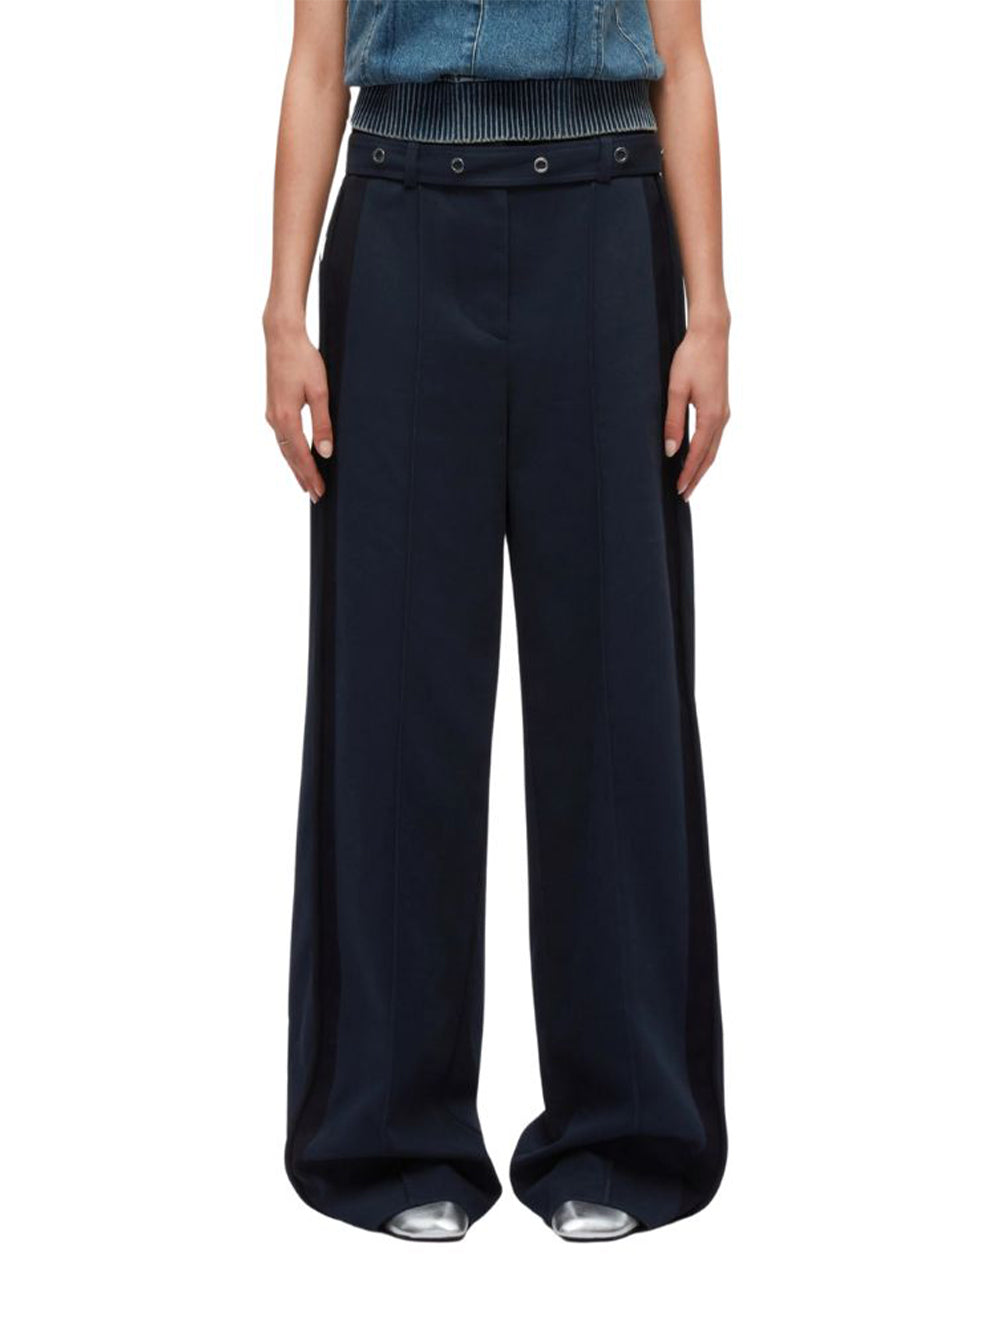 3.1 Phillip Lim-Belted Utility Pant W Panel-Midnight-1